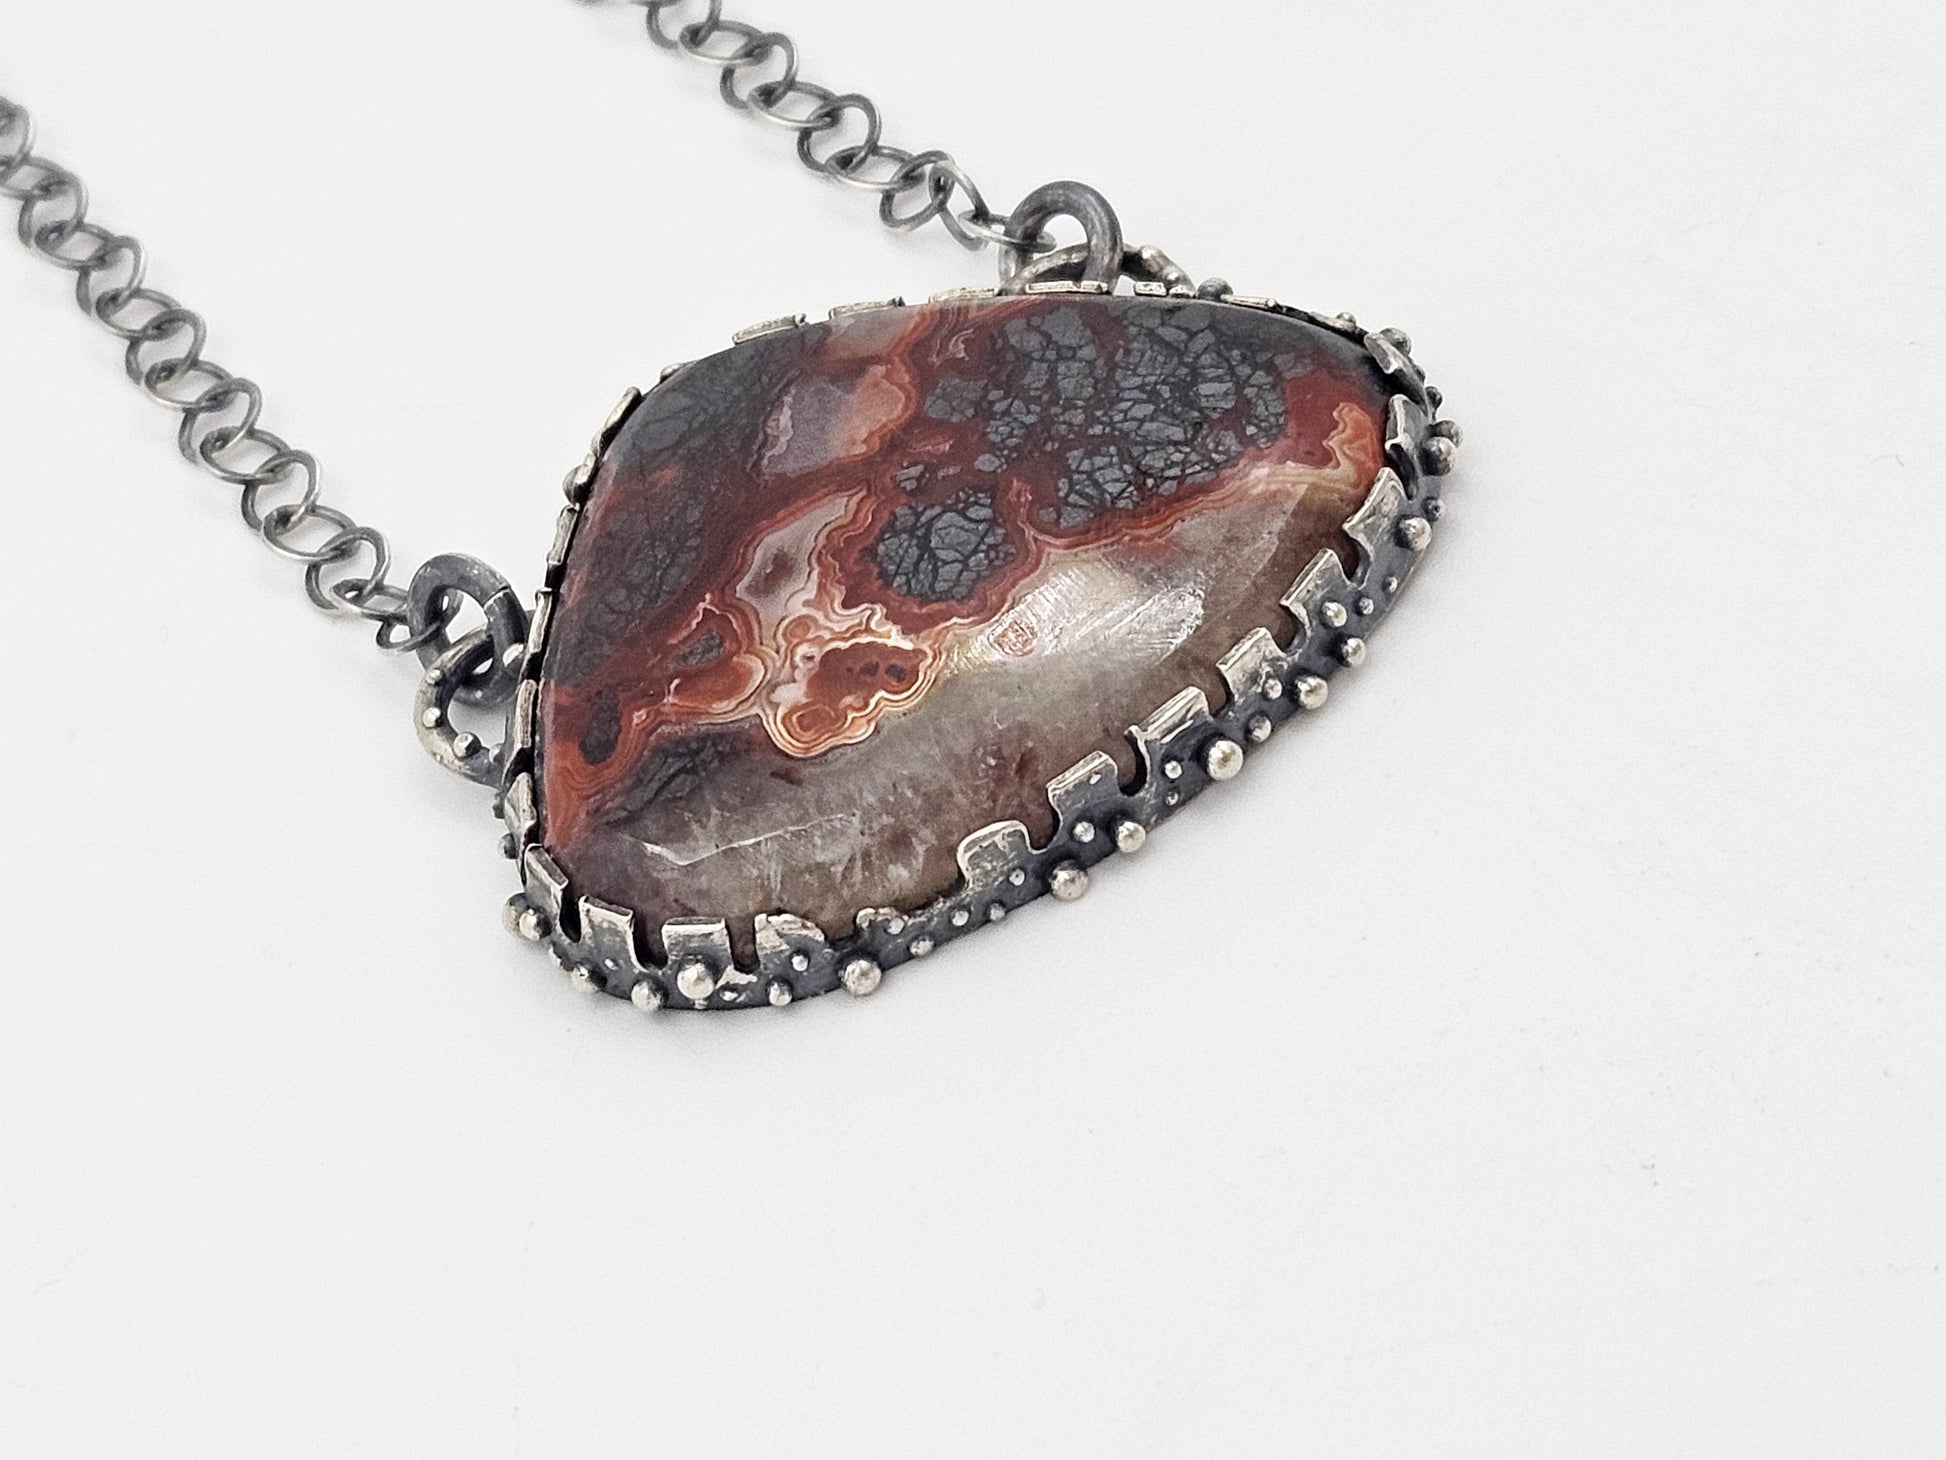 Artisan Signed Necklace Jewelry Artisan Signed Sterling & Crazy Lace Agate Pendant Necklace